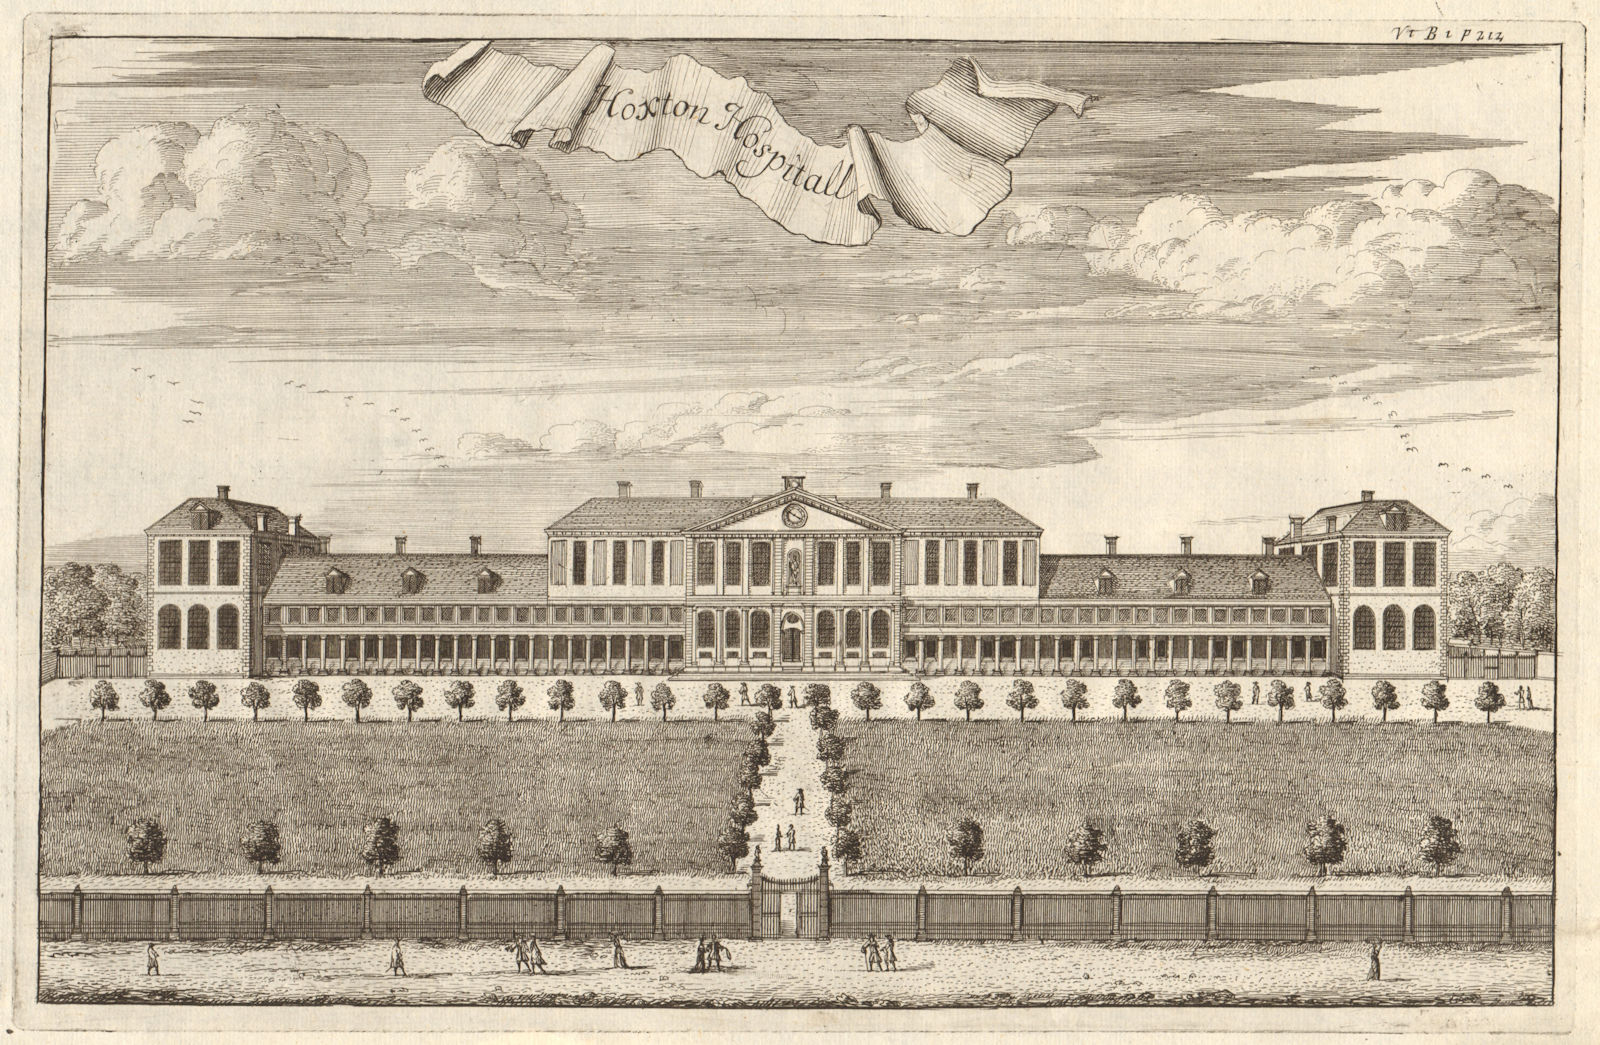 'Hoxton Hospitall'. Haberdashers Aske's school/almshouses. STOW/STRYPE 1720